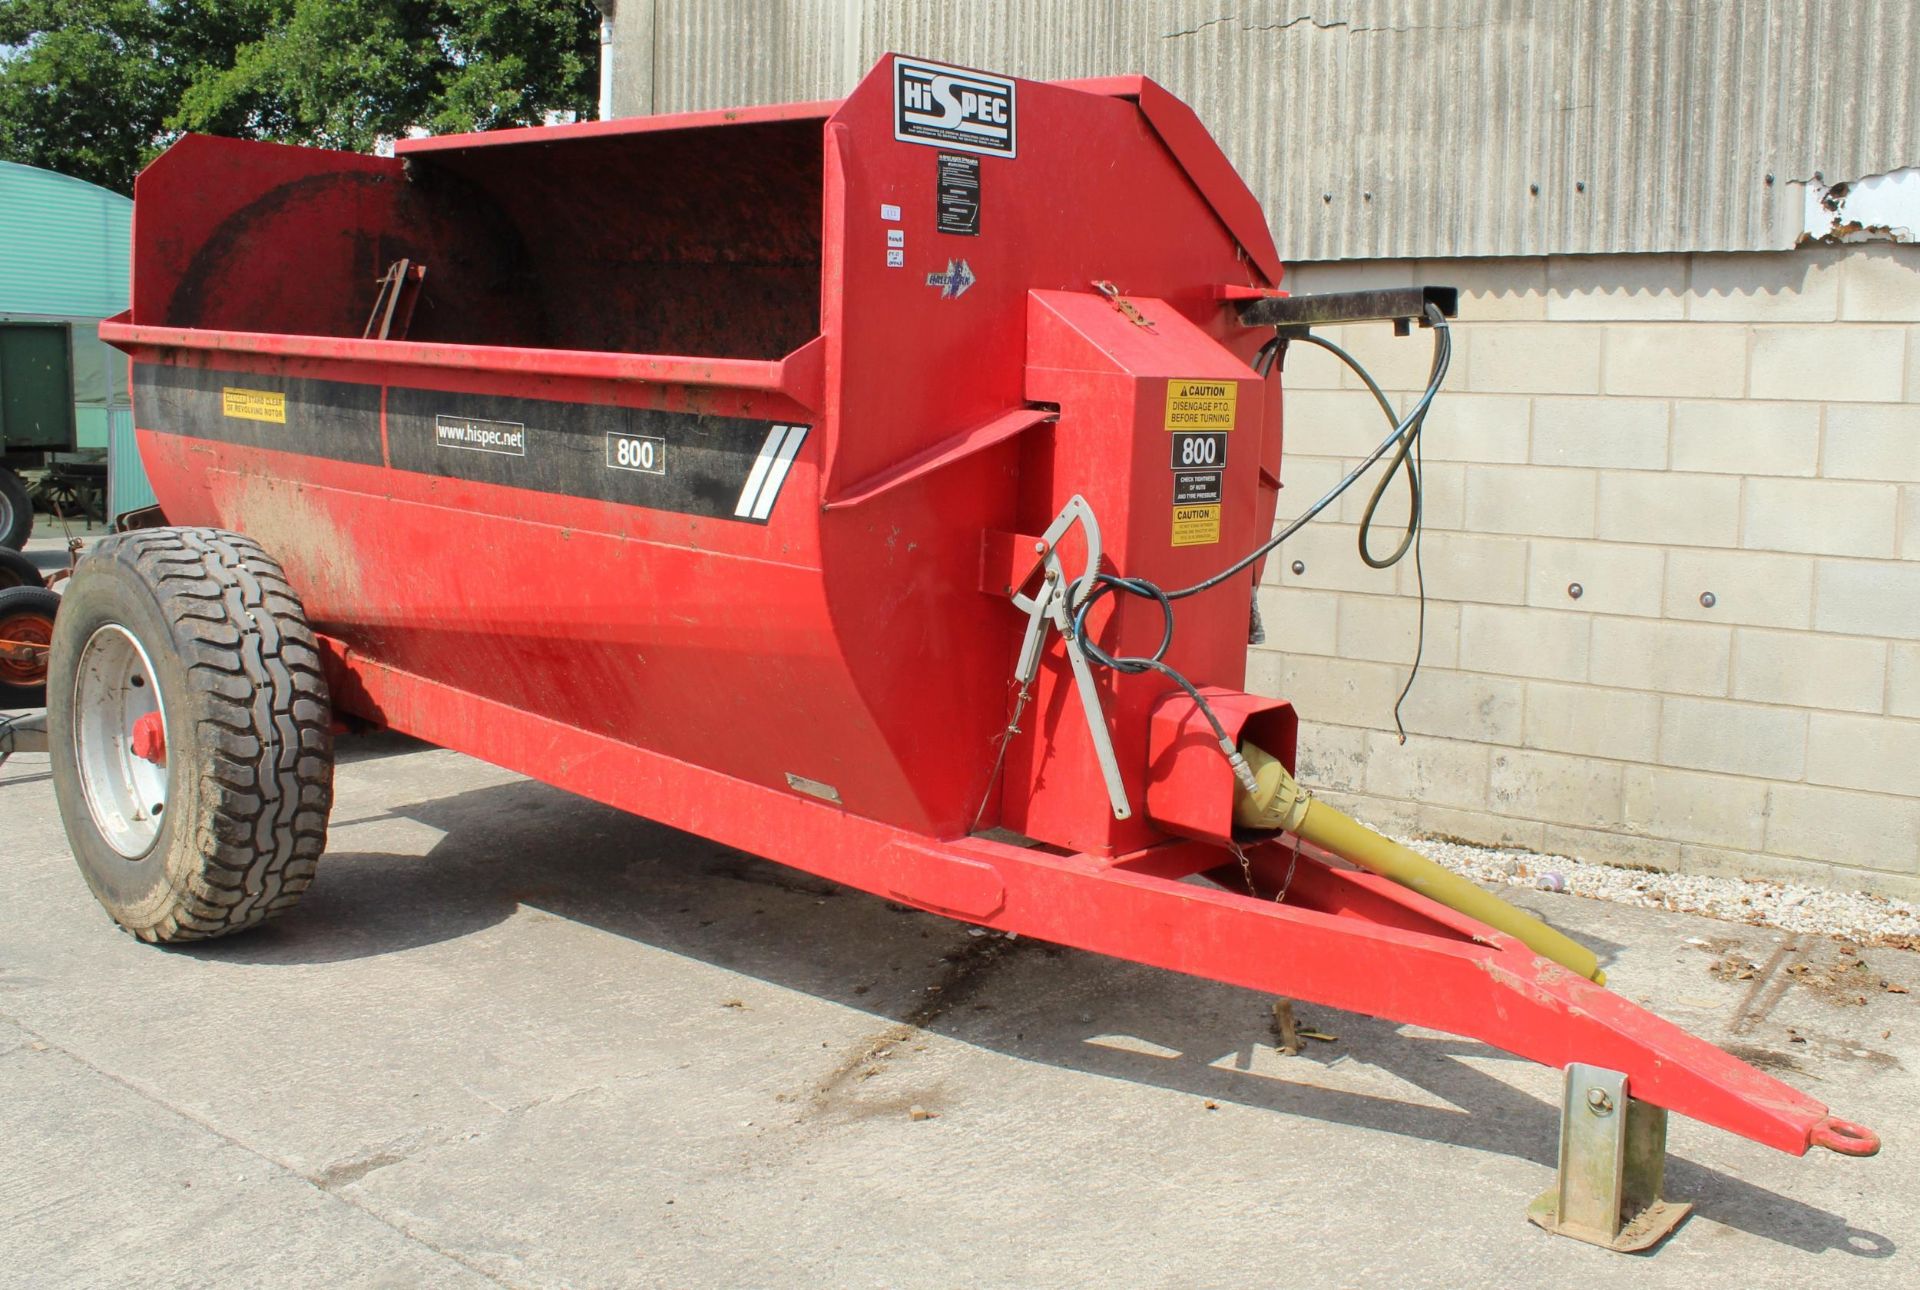 HI SPEC 800 MANURE SPREADER 2005 - 8 CUBIC METERS -VERY LITTLE USED PTO TO BE COLLECTED FROM THE PAY